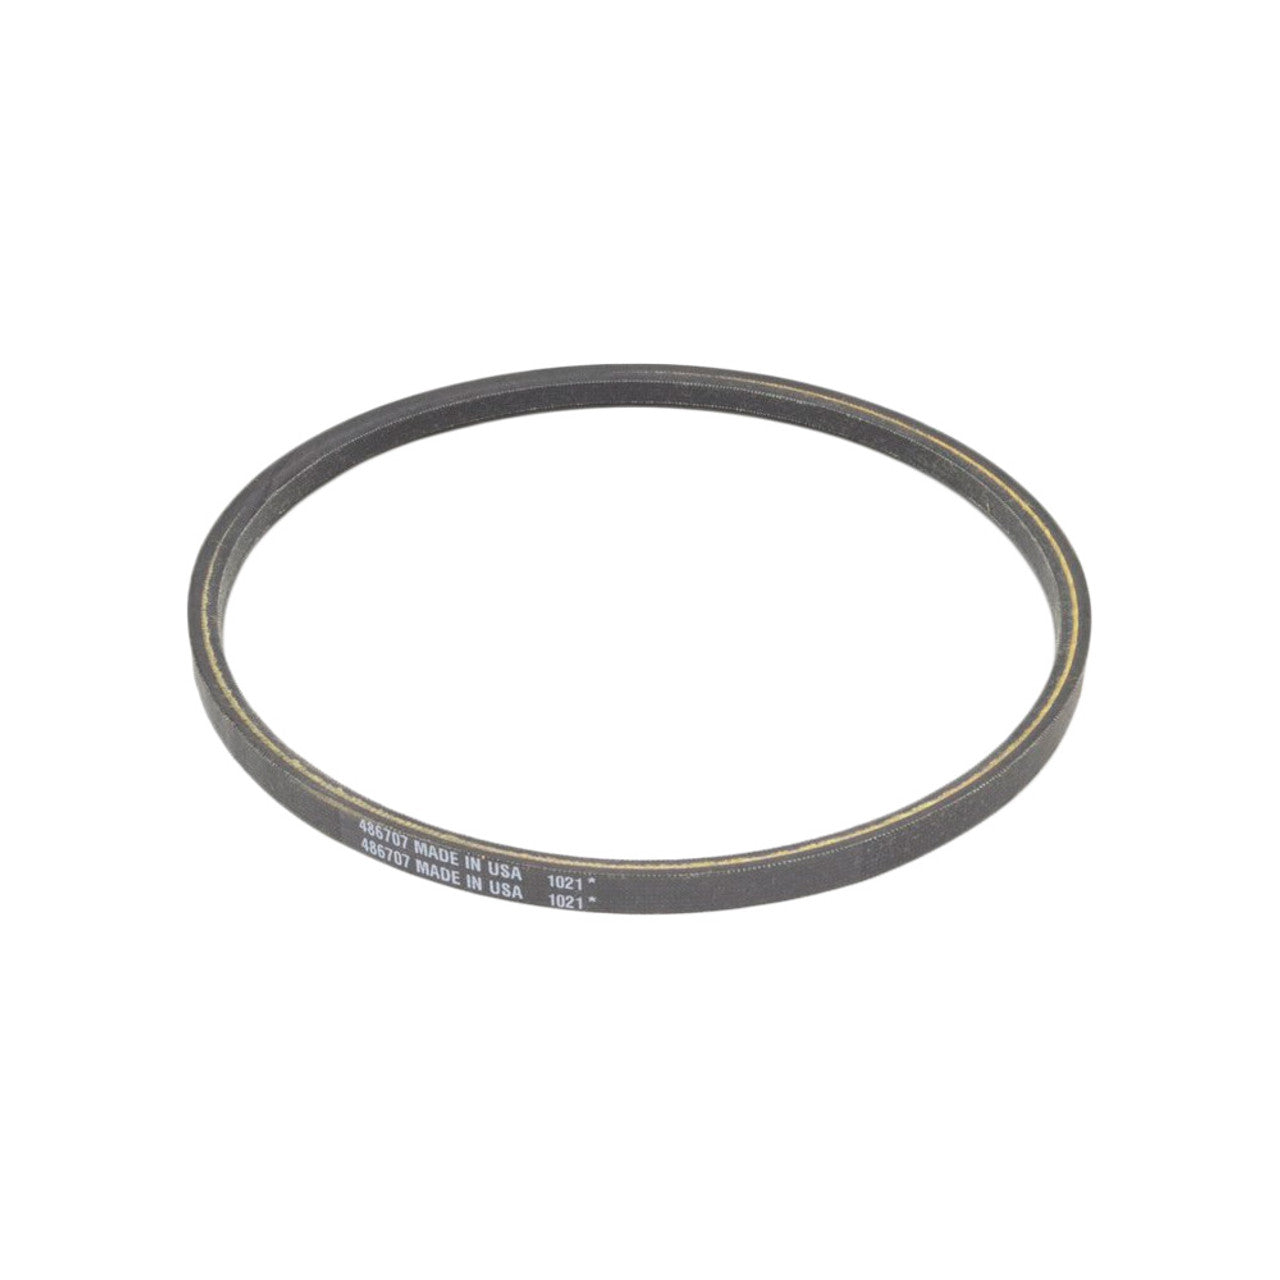 SCAG SFC30-TRANSMISSION BELT 486707  Buy SCAG SFC 30 parts. Australia-wide delivery of SCAG SFC 30 parts. SCAG SFC 30 parts at the best prices. Fast Delivery. We only sell what we have in stock. Shop now for your SCAG SFC 30 parts here at Mowermerch SCAG SFC 30 parts.